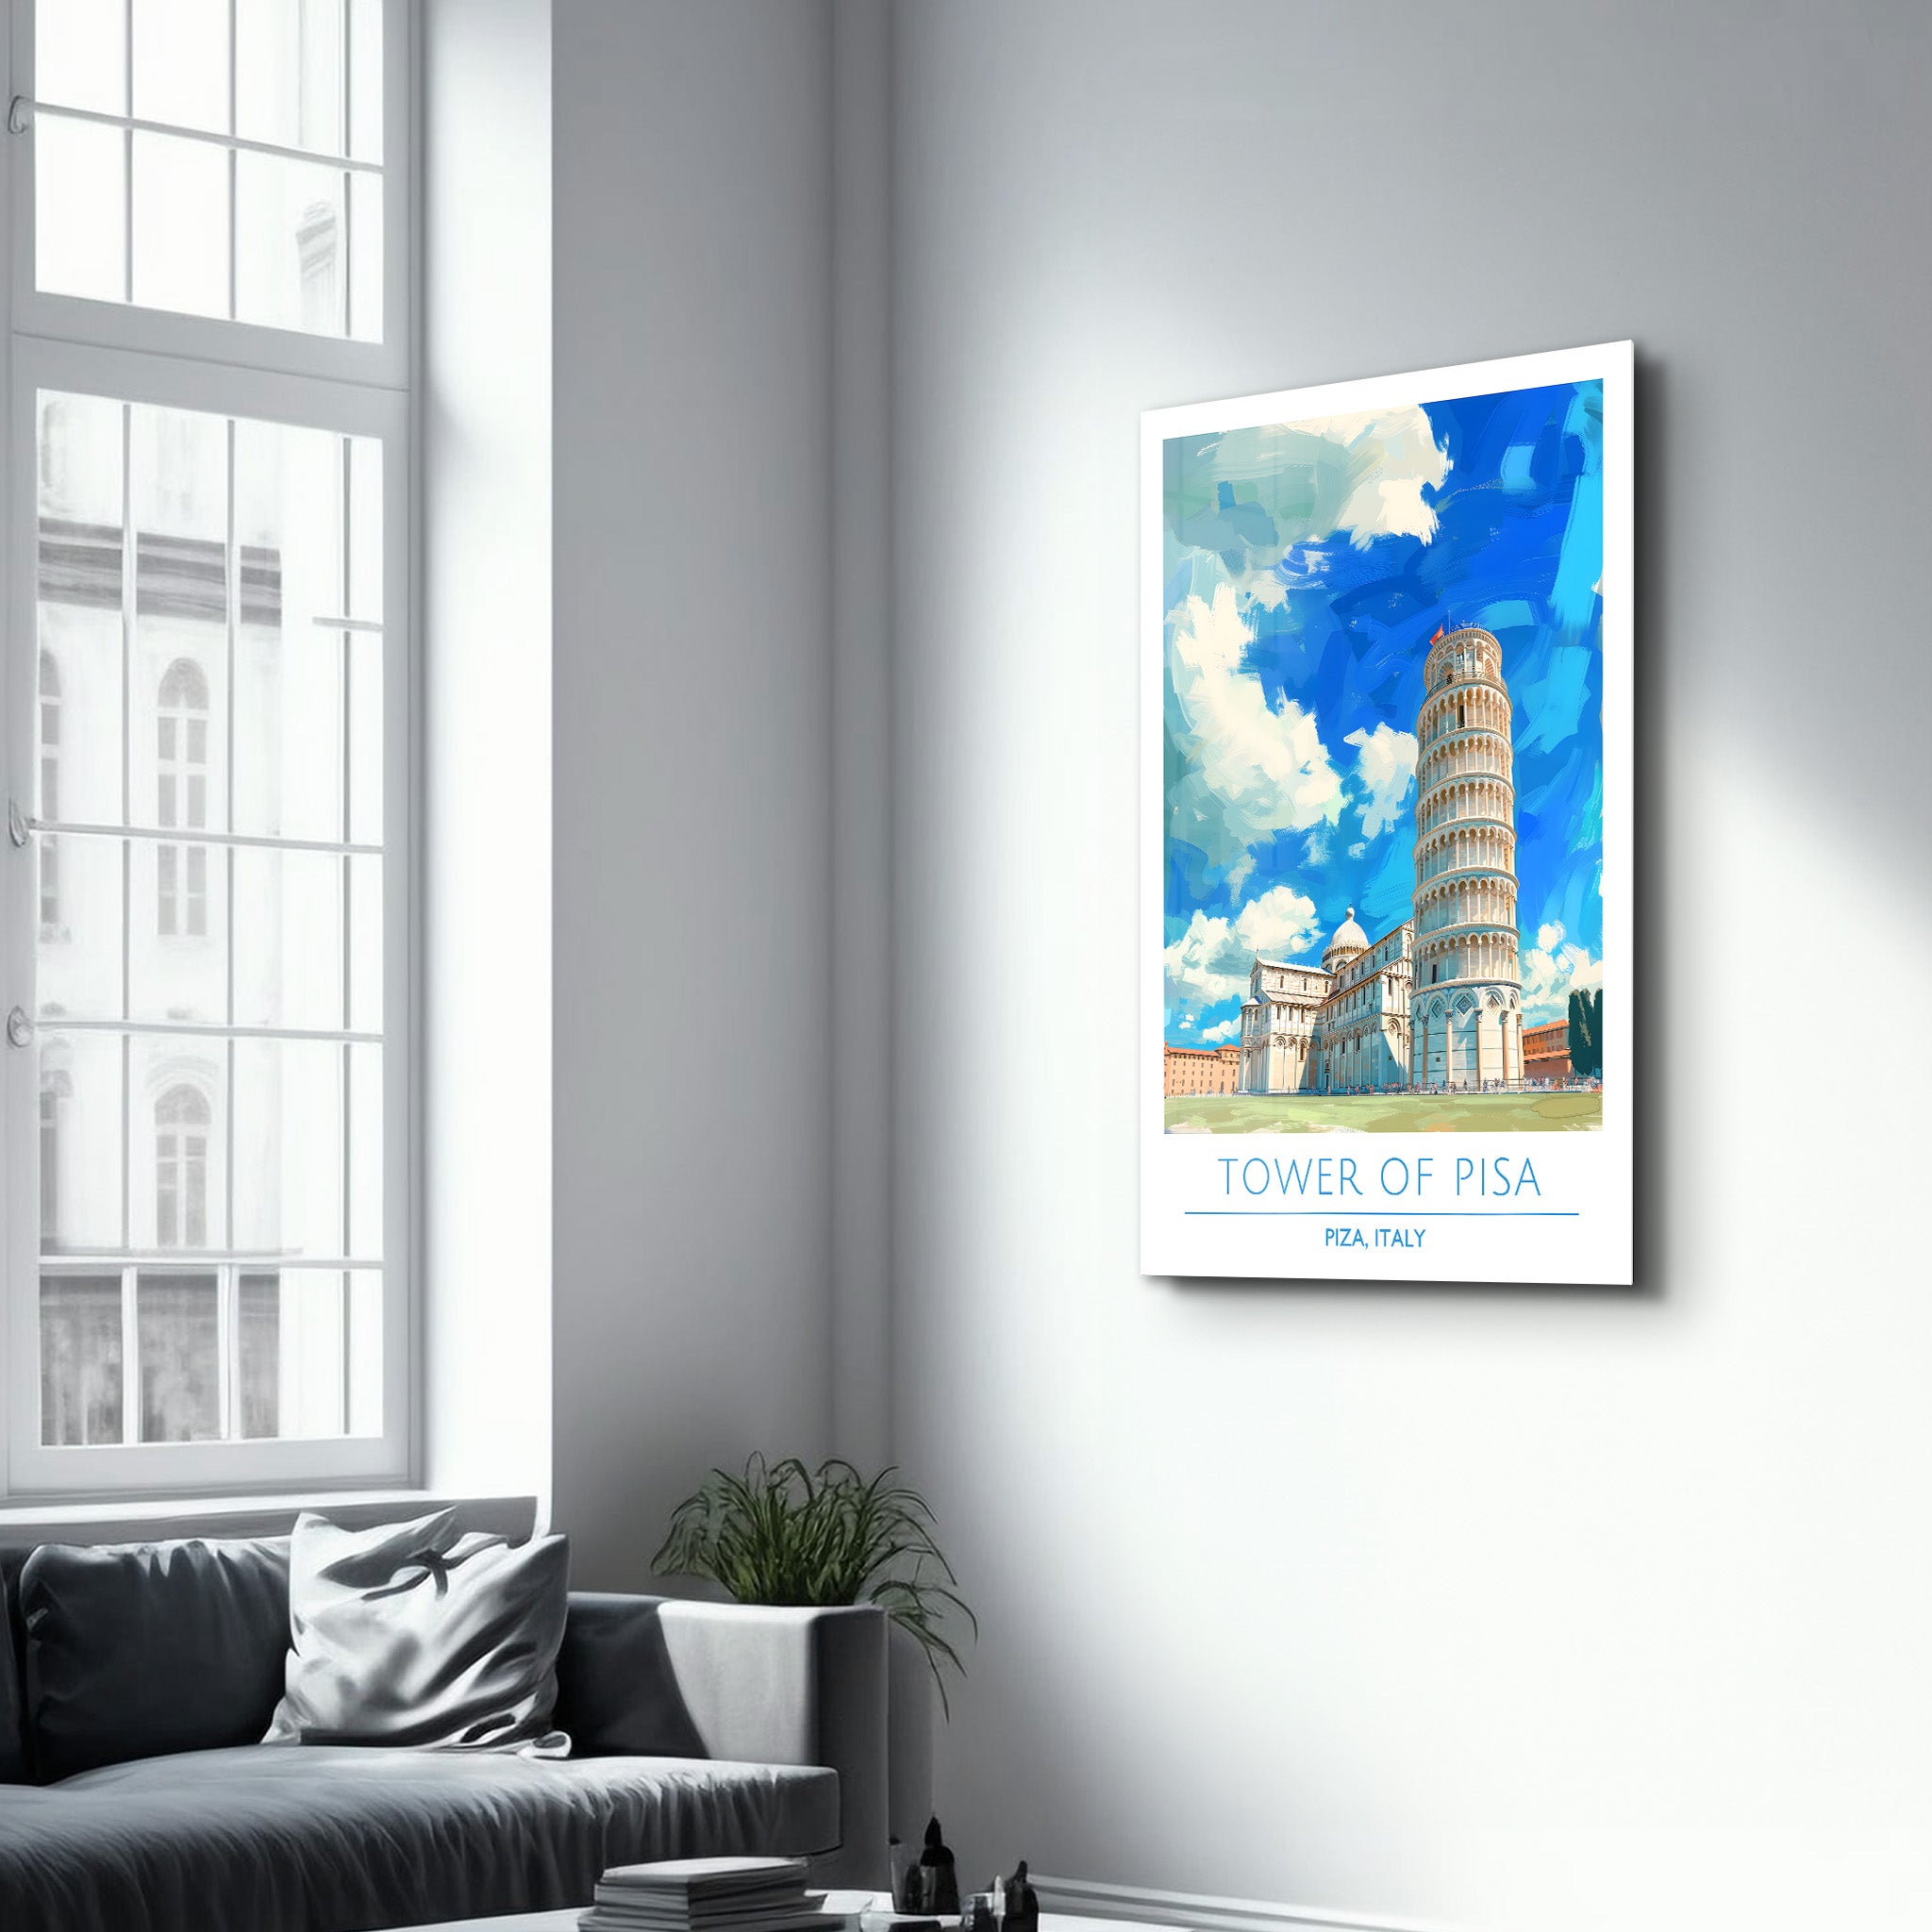 Tower Of Pisa-Piza Italy-Travel Posters | Glass Wall Art